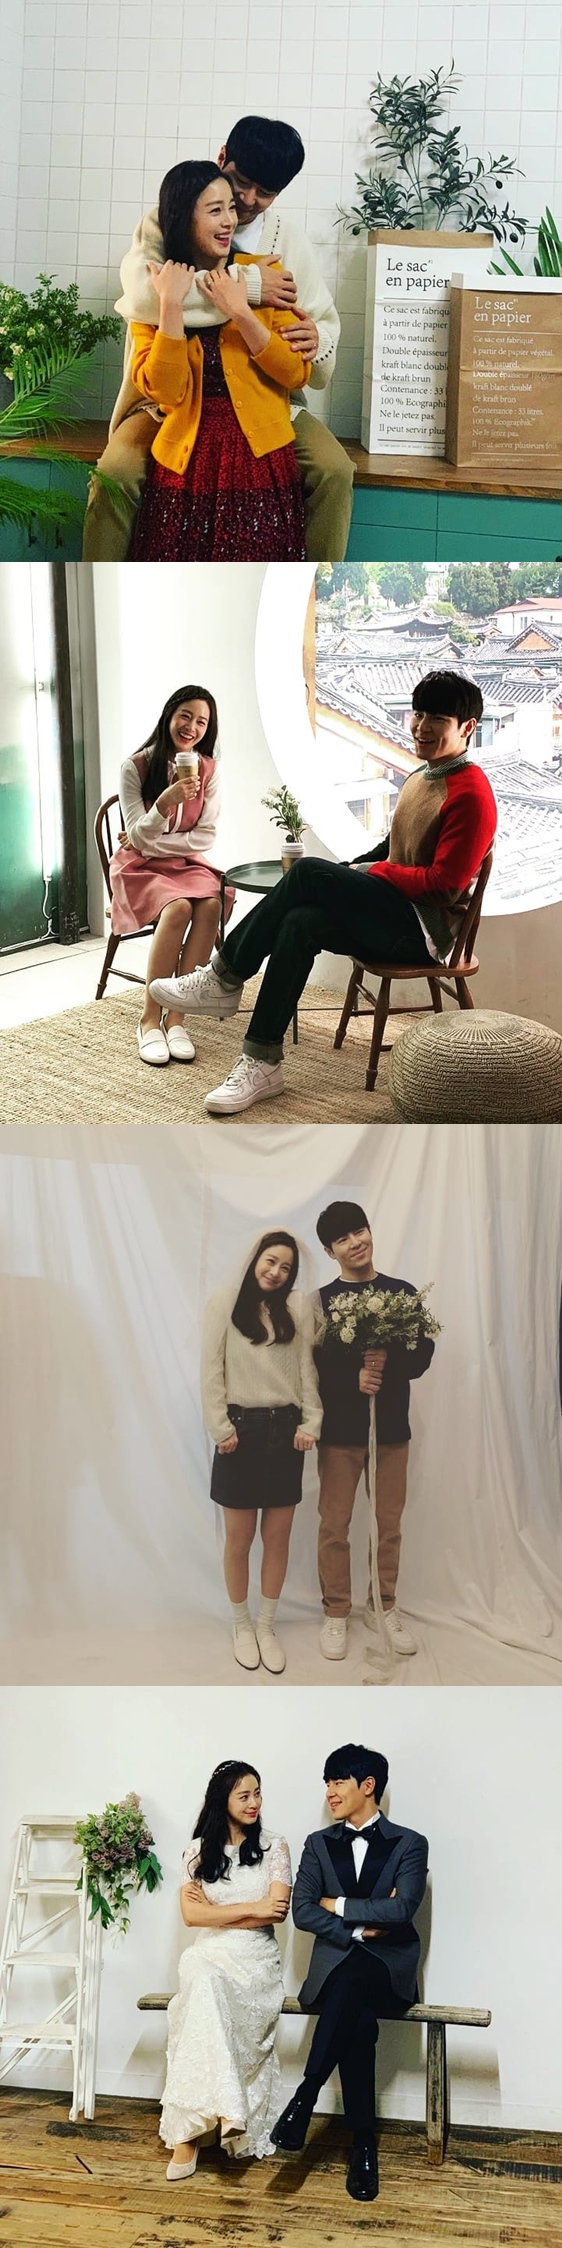 Actor Kim Tae-hee has released a two-shot with Lee Gyoo-hyeong.Kim Tae-hee told his Instagram on the 23rd, The hard times of Kanghwa and Kwon Yuri, which seemed to be not broken like Tempered glass ... are memories that I have searched again with gratitude to all those who watched the first room  ~ Will everyone try to shoot catch the prime at 9 pm tonight?# Kim Tae-hee # Lee Gyoo-hyeong # HighEsporte Clube BahiaMama and posted several photos.Kim Tae-hee in the public photo is showing off his affectionate couple chemistry with Actor Lee Gyoo-hyeong, who is appearing as a husband in the play.The two men were thrilled to produce wedding poses from the dress that reminds me of my love life.Kim Tae-hee is appearing as Kwon Yuri in TVN Drama Hi Esporte Clube Bahia, Mama.Photo: Kim Tae-hee Instagram